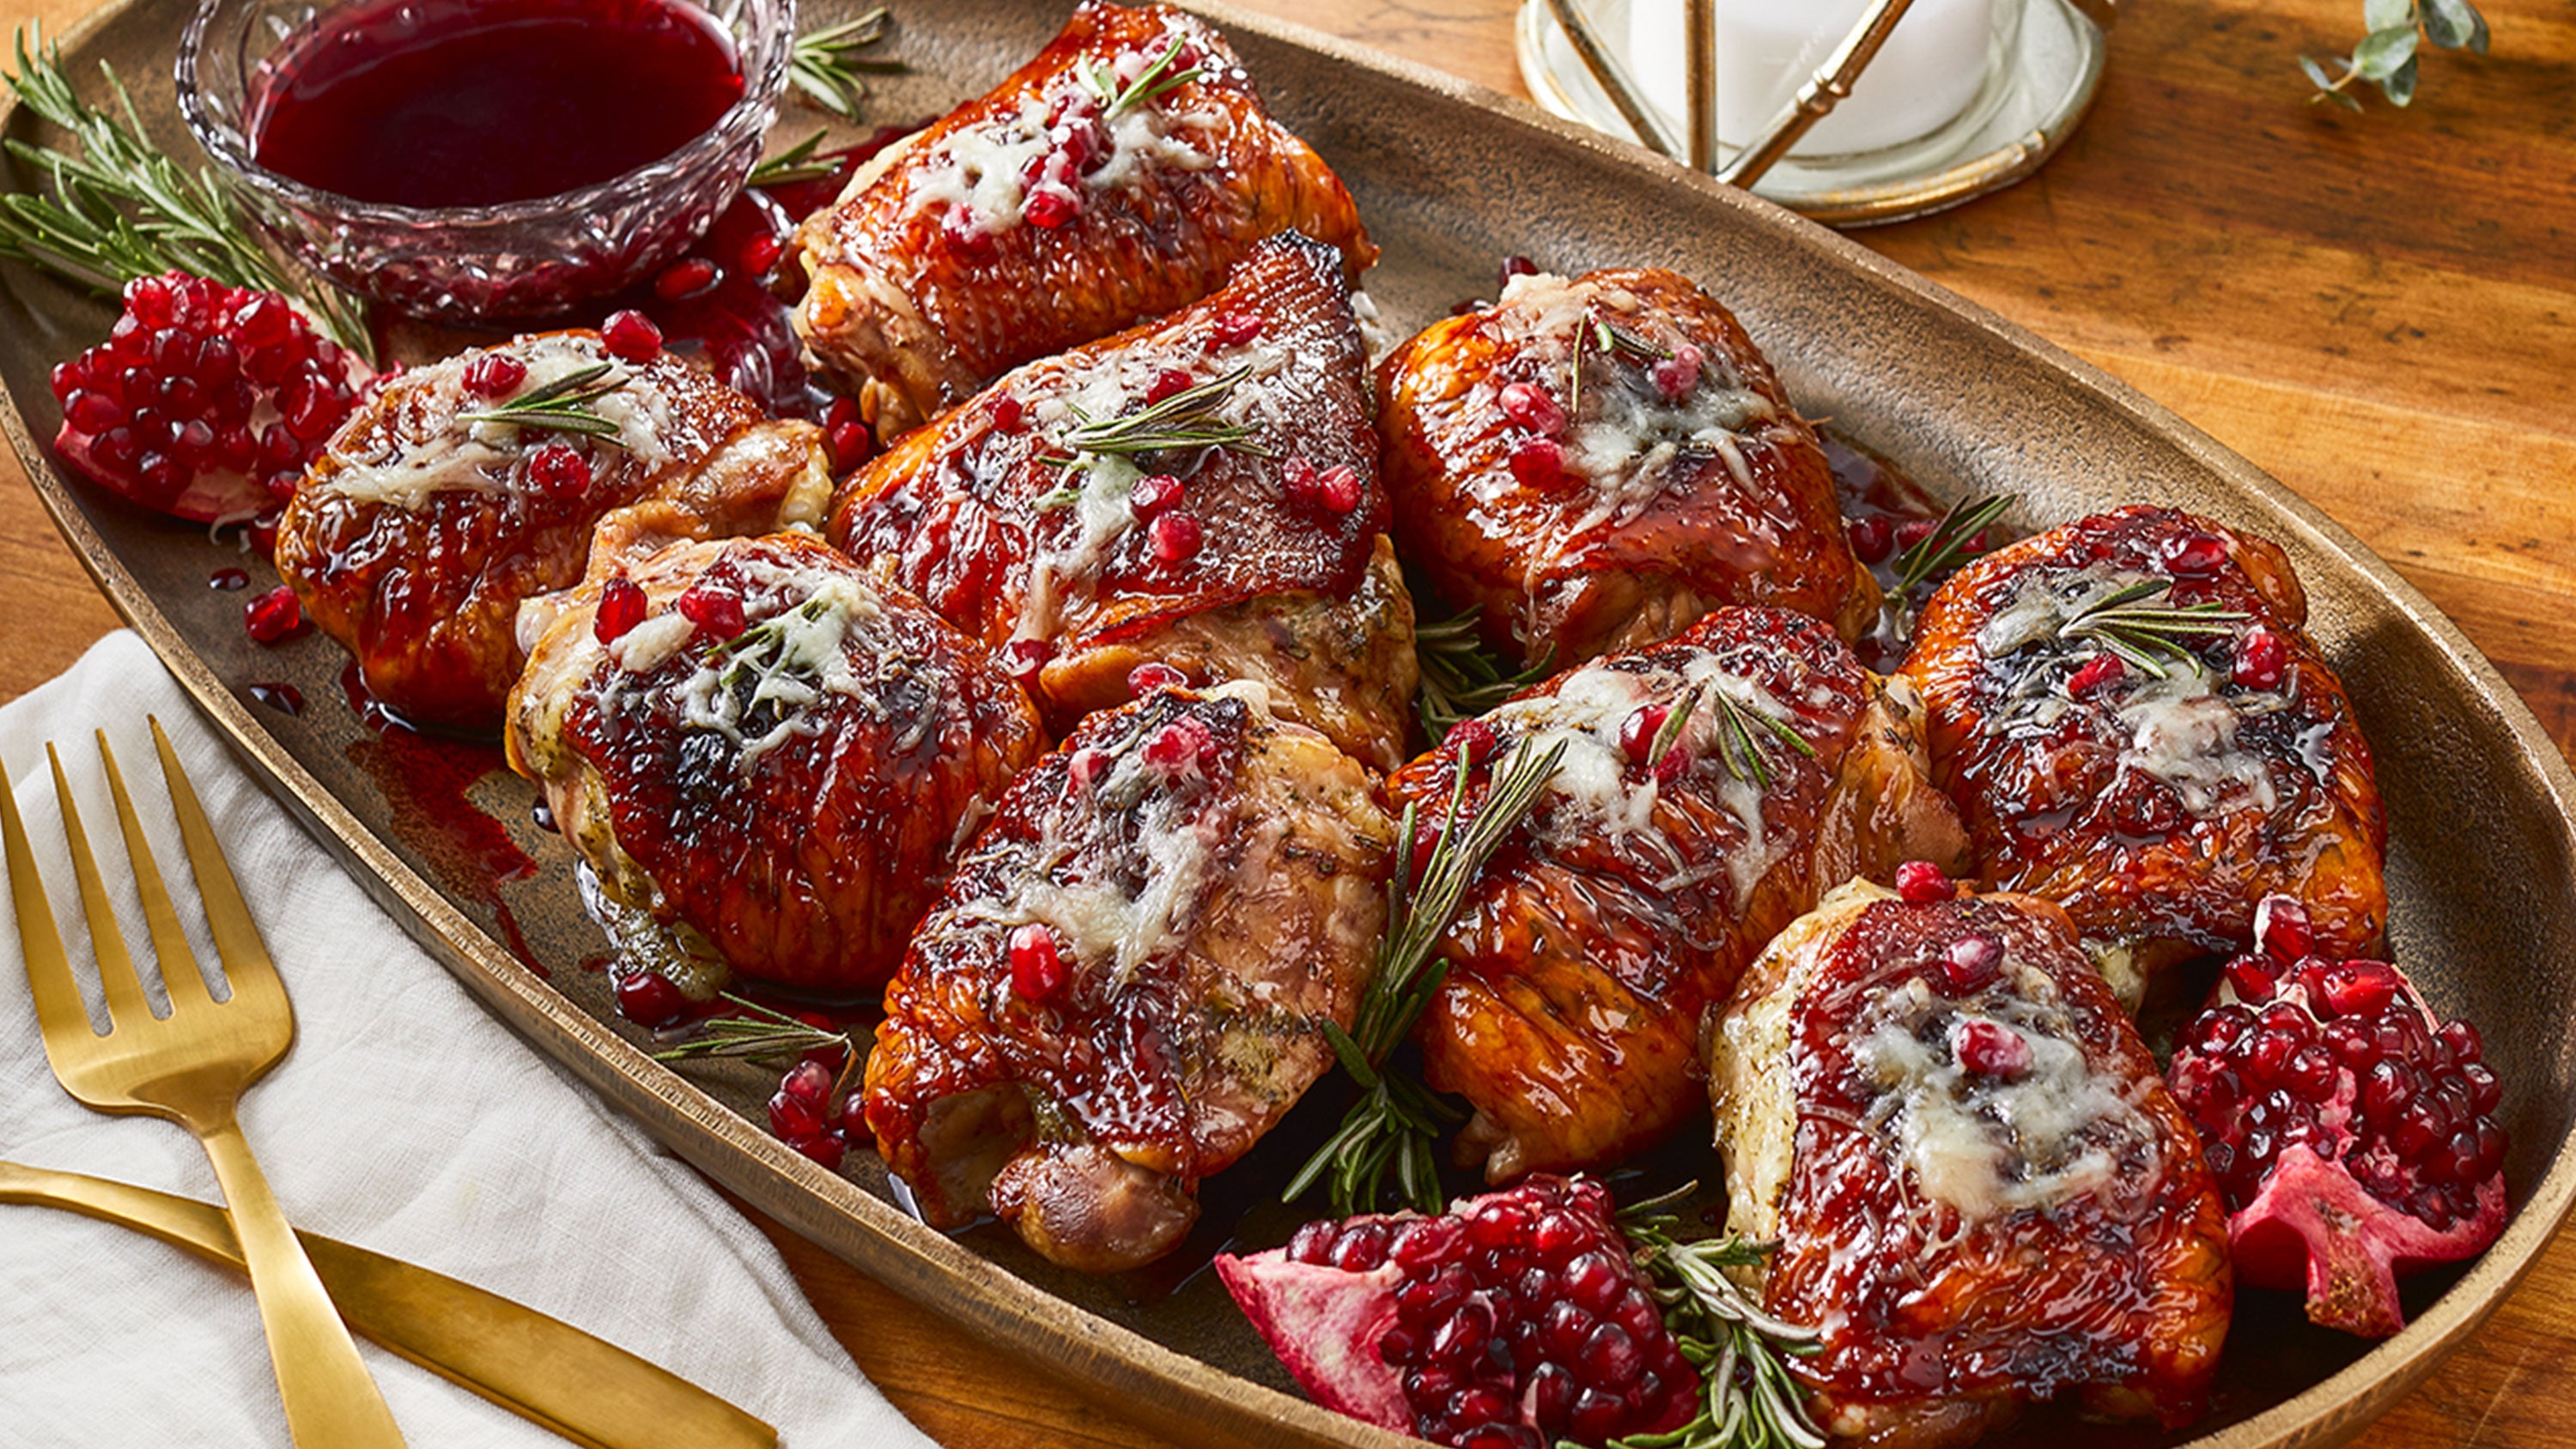 Pomegranate-Glazed Chicken Thighs with Asiago